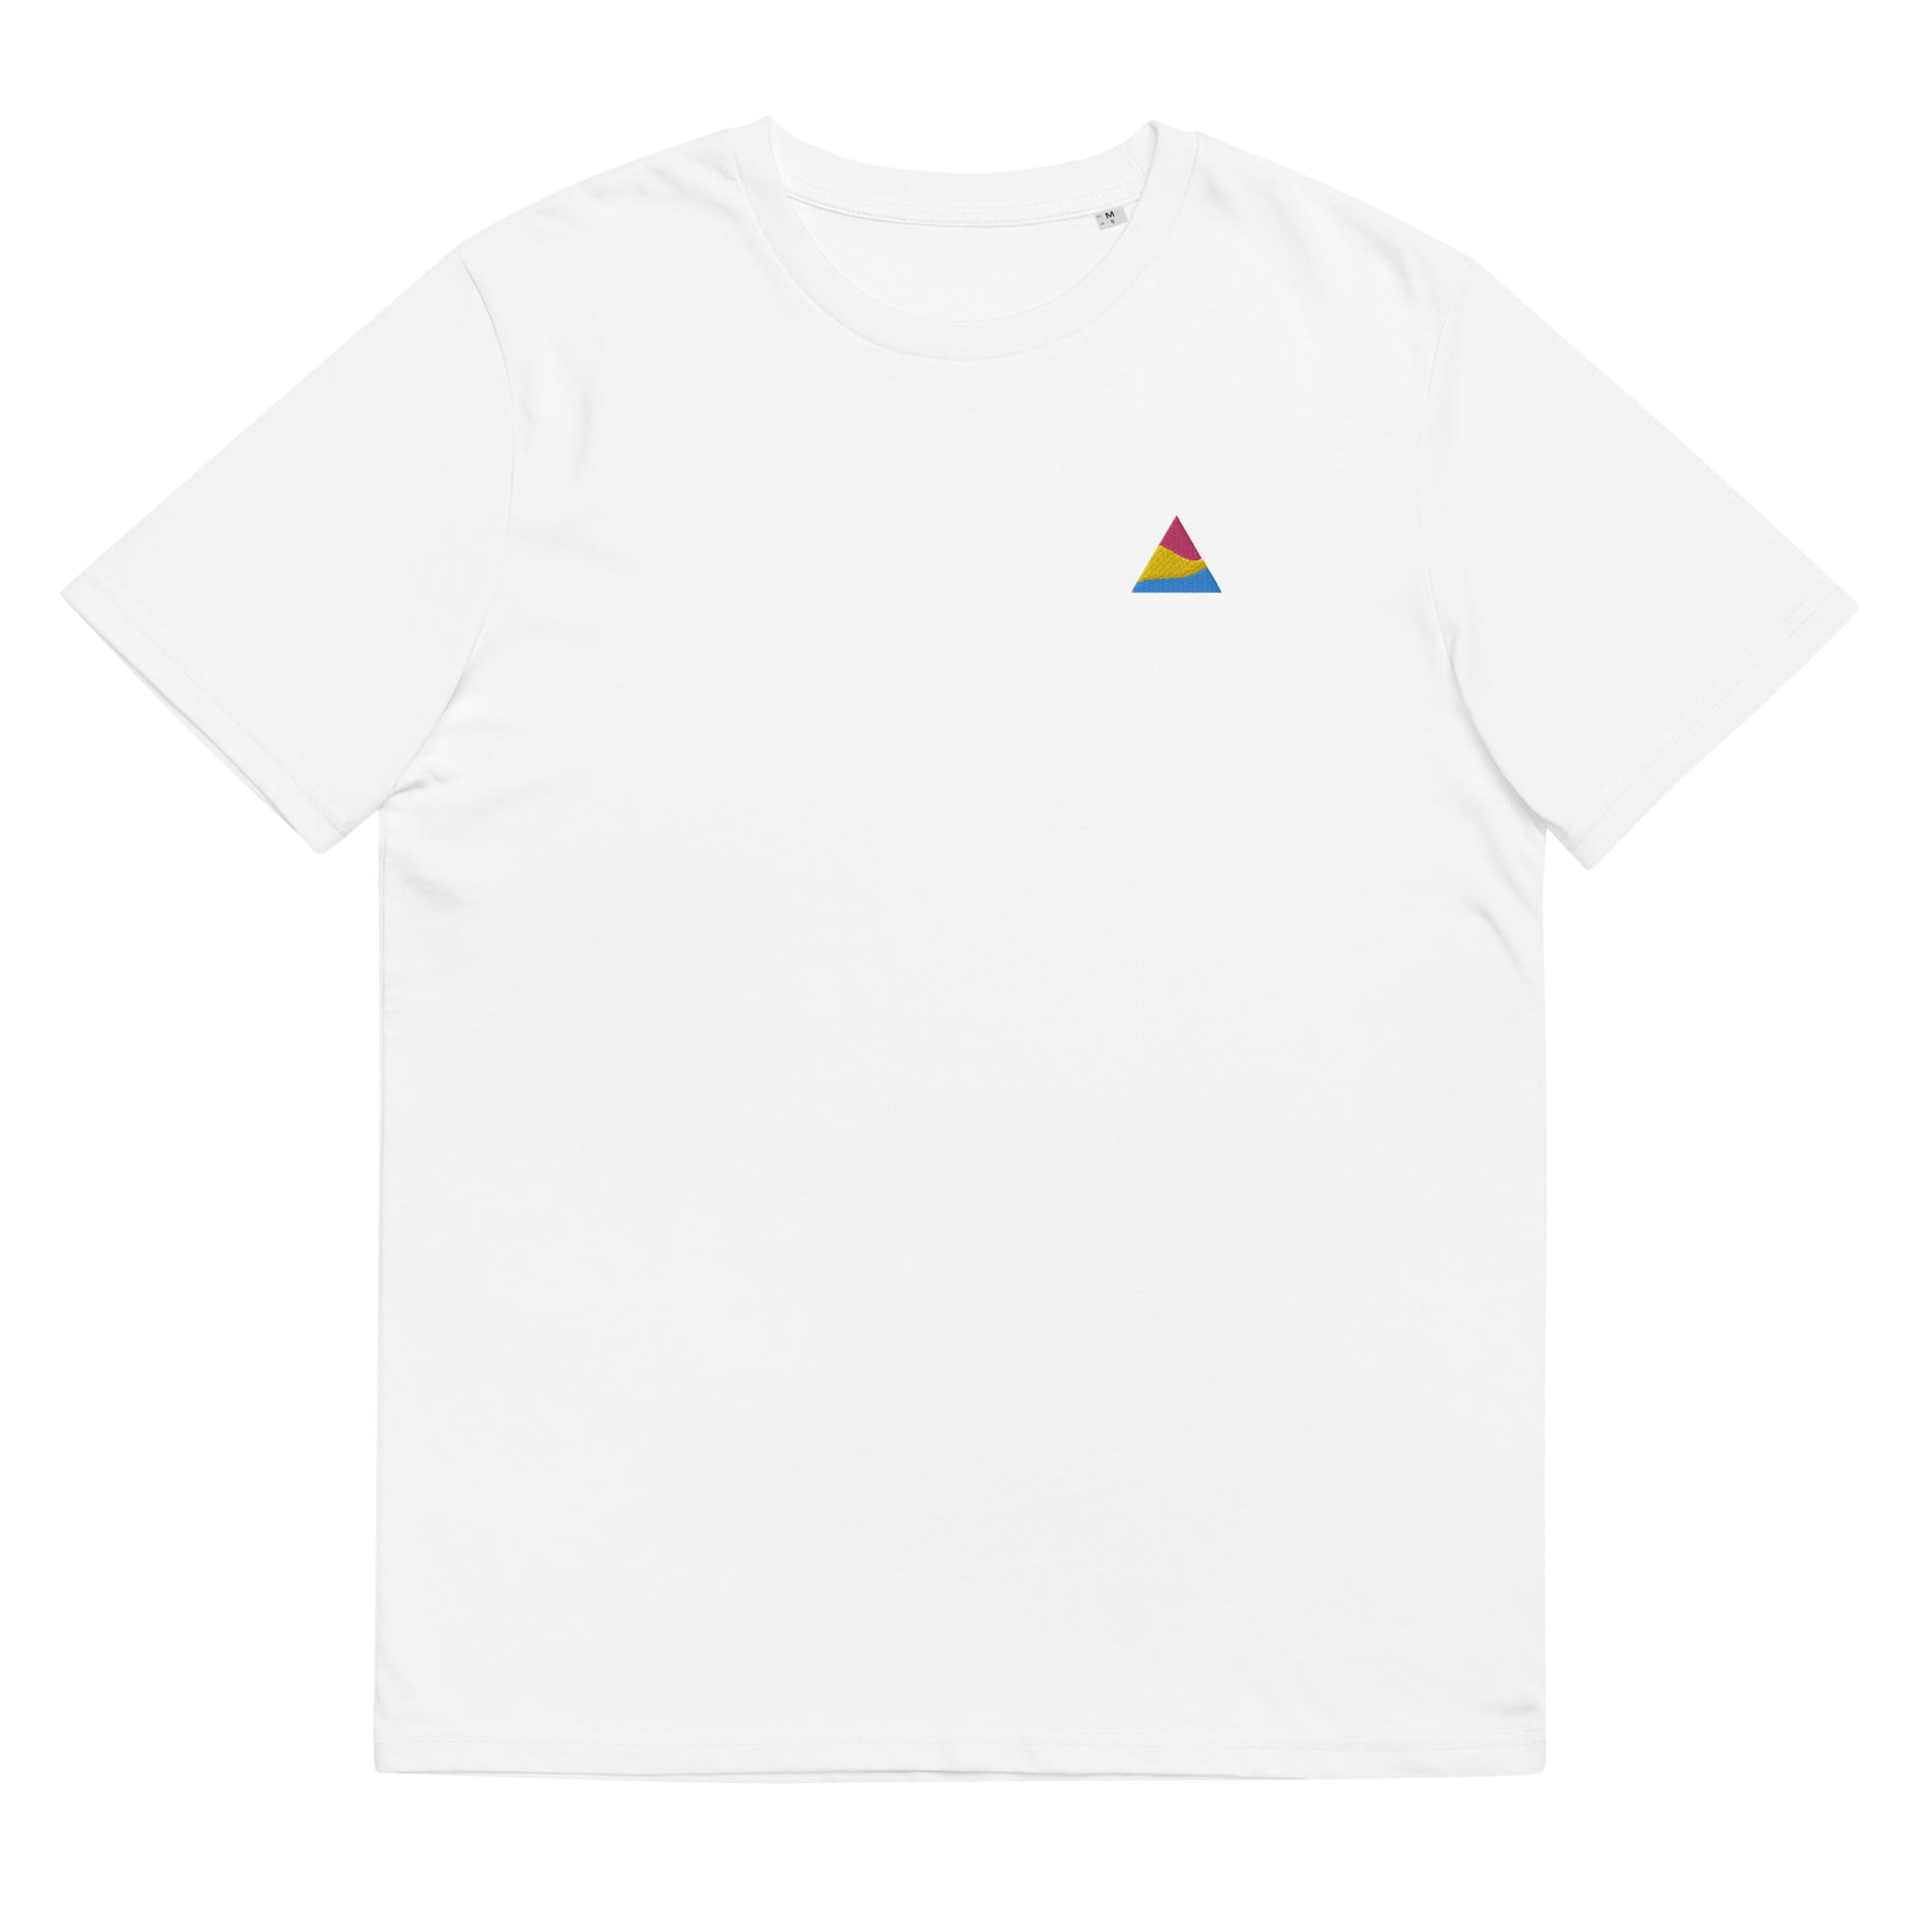 Fitted white organic cotton t-shirt with a small embroidered triangle in pansexual colors on the left chest. Available in sizes S to 3XL.